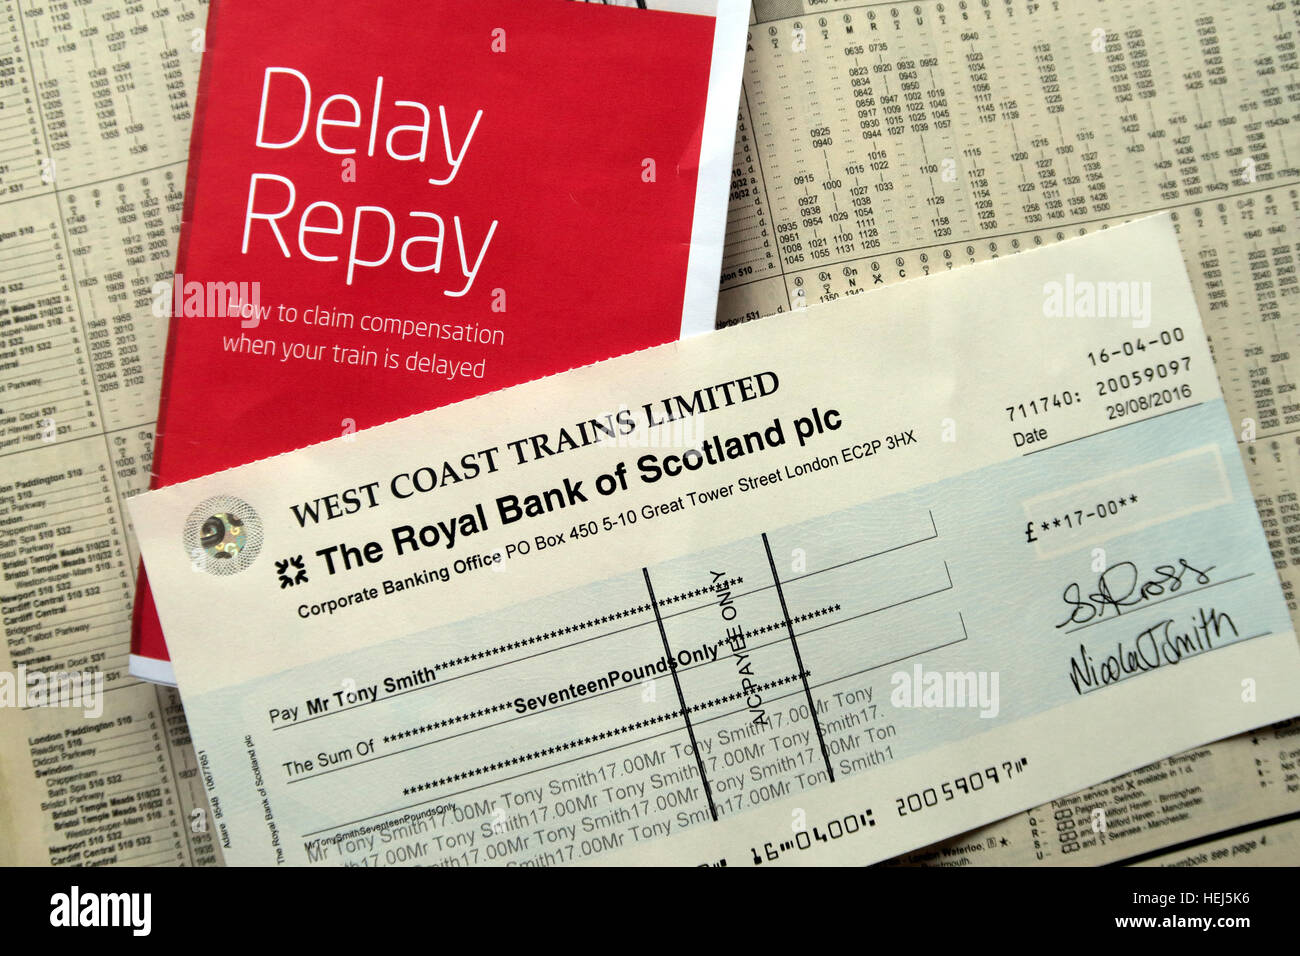 Cheque repayment for Delay Repay, from West Coast Trains,  Virgin, compensation for late rail journey Stock Photo